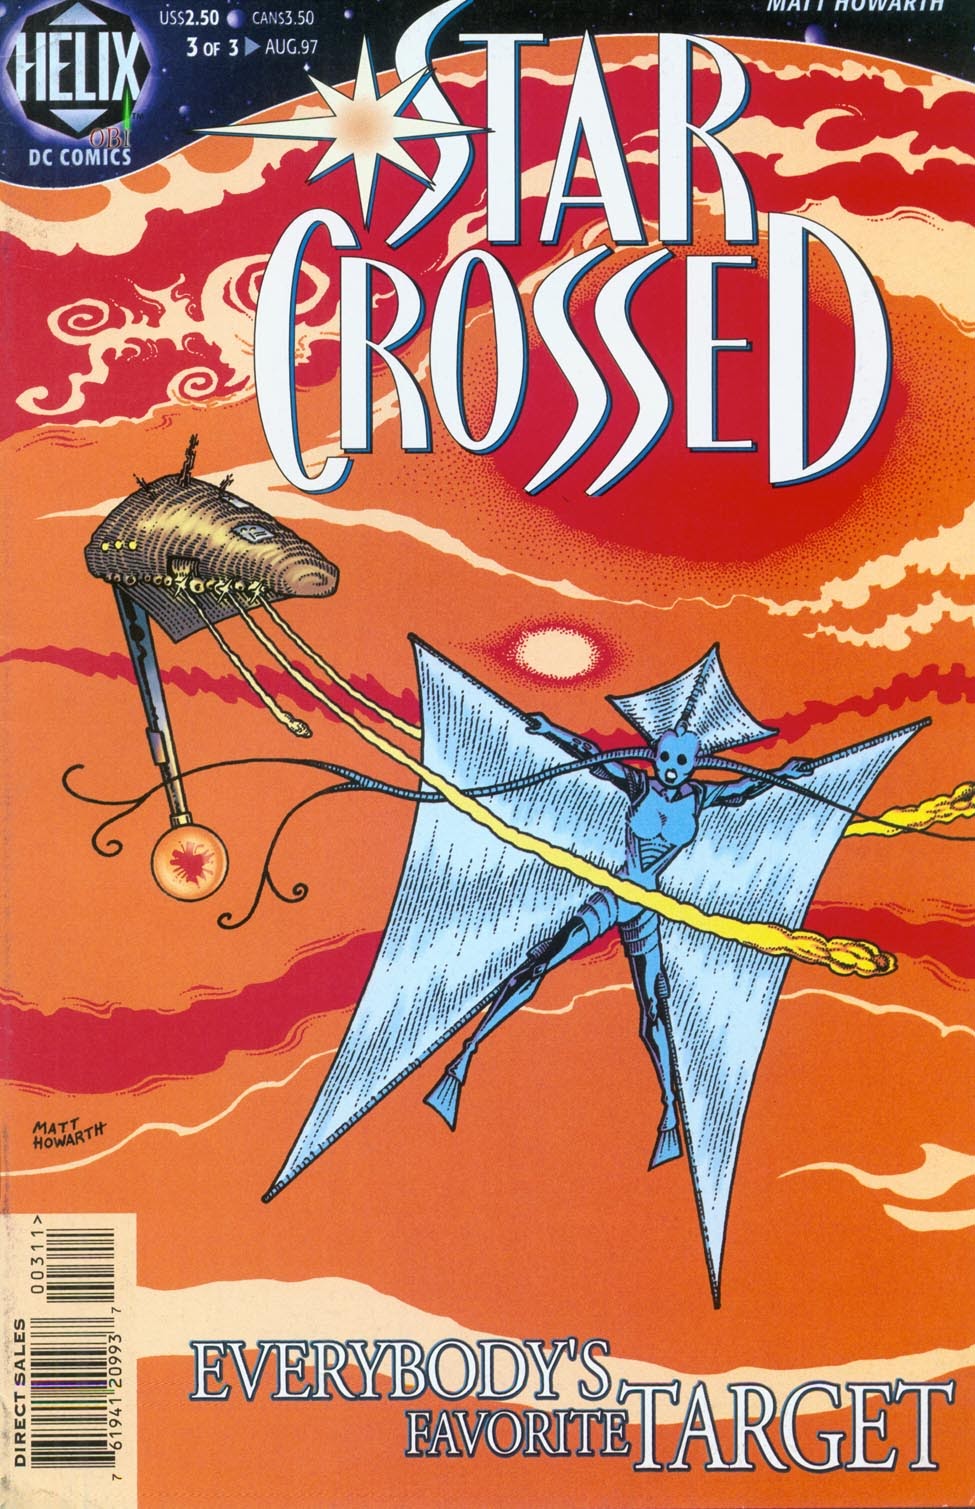 Read online Star Crossed comic -  Issue #3 - 1